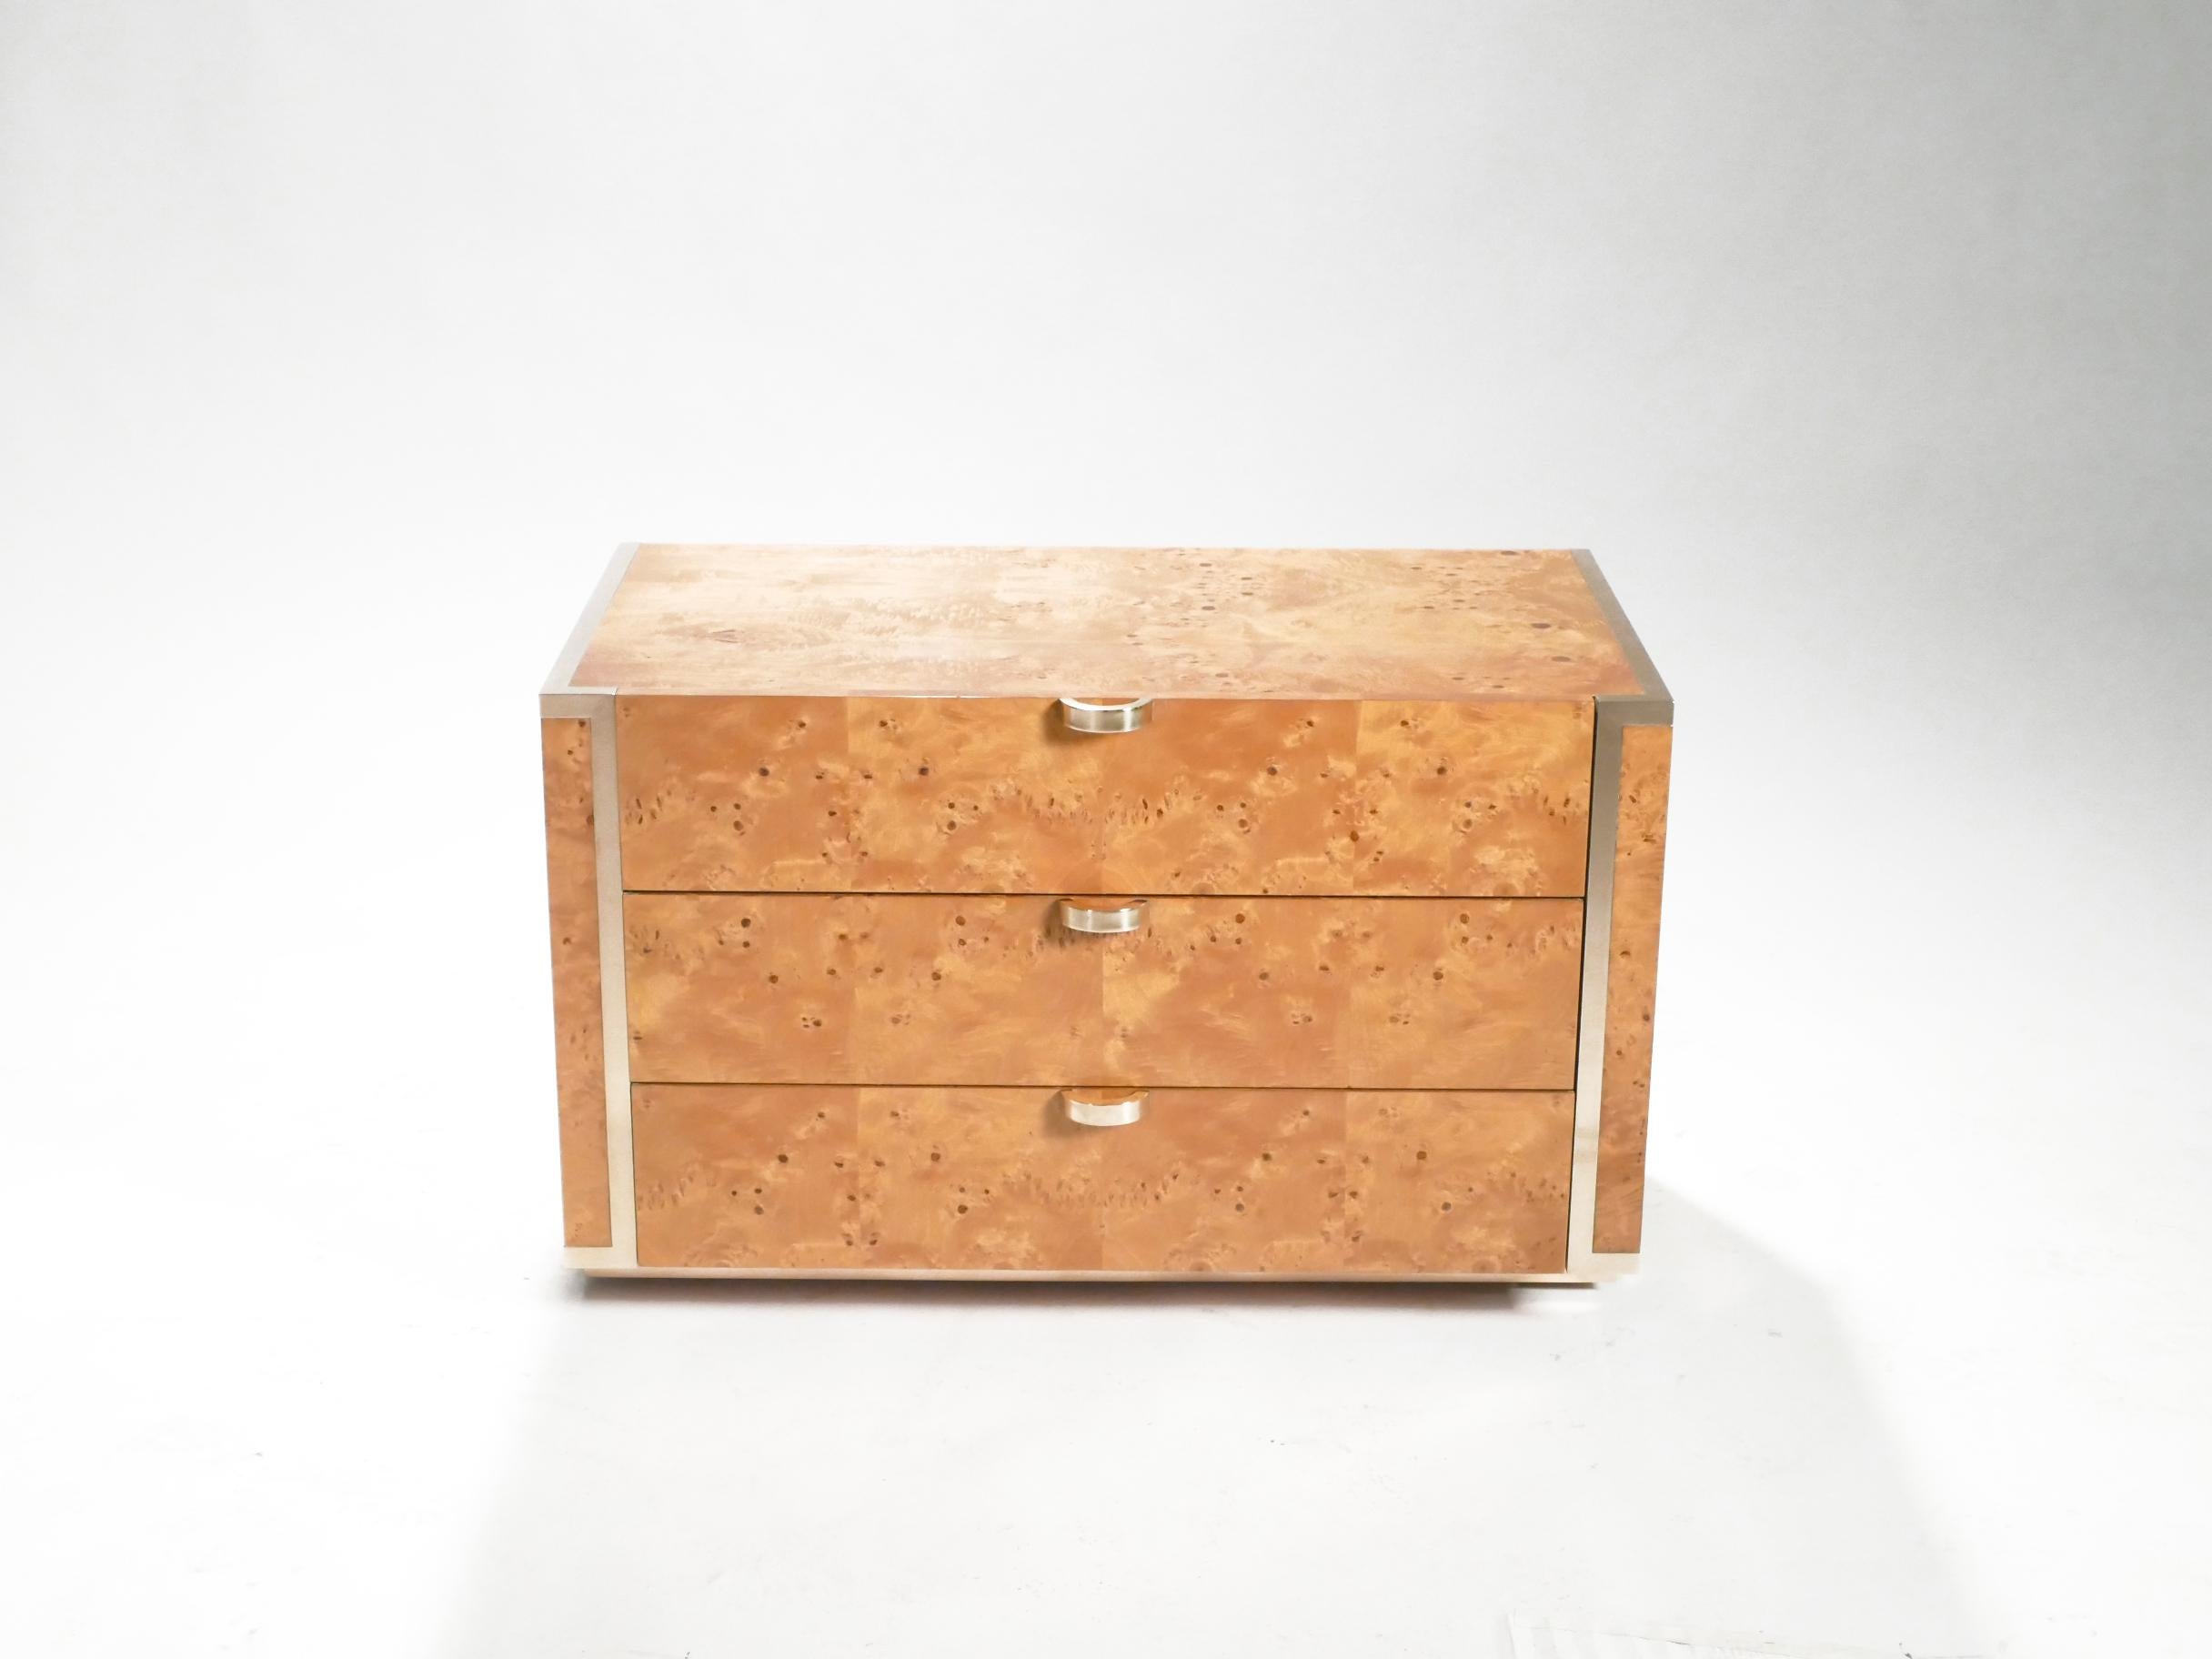 With its small size, neutral caramel color and roomy drawers, this chest of drawers is remarkably versatile for contemporary interiors—the piece would do equally well as a nightstand, a side table, or an end table. It has a Mid-Century Modern sleek